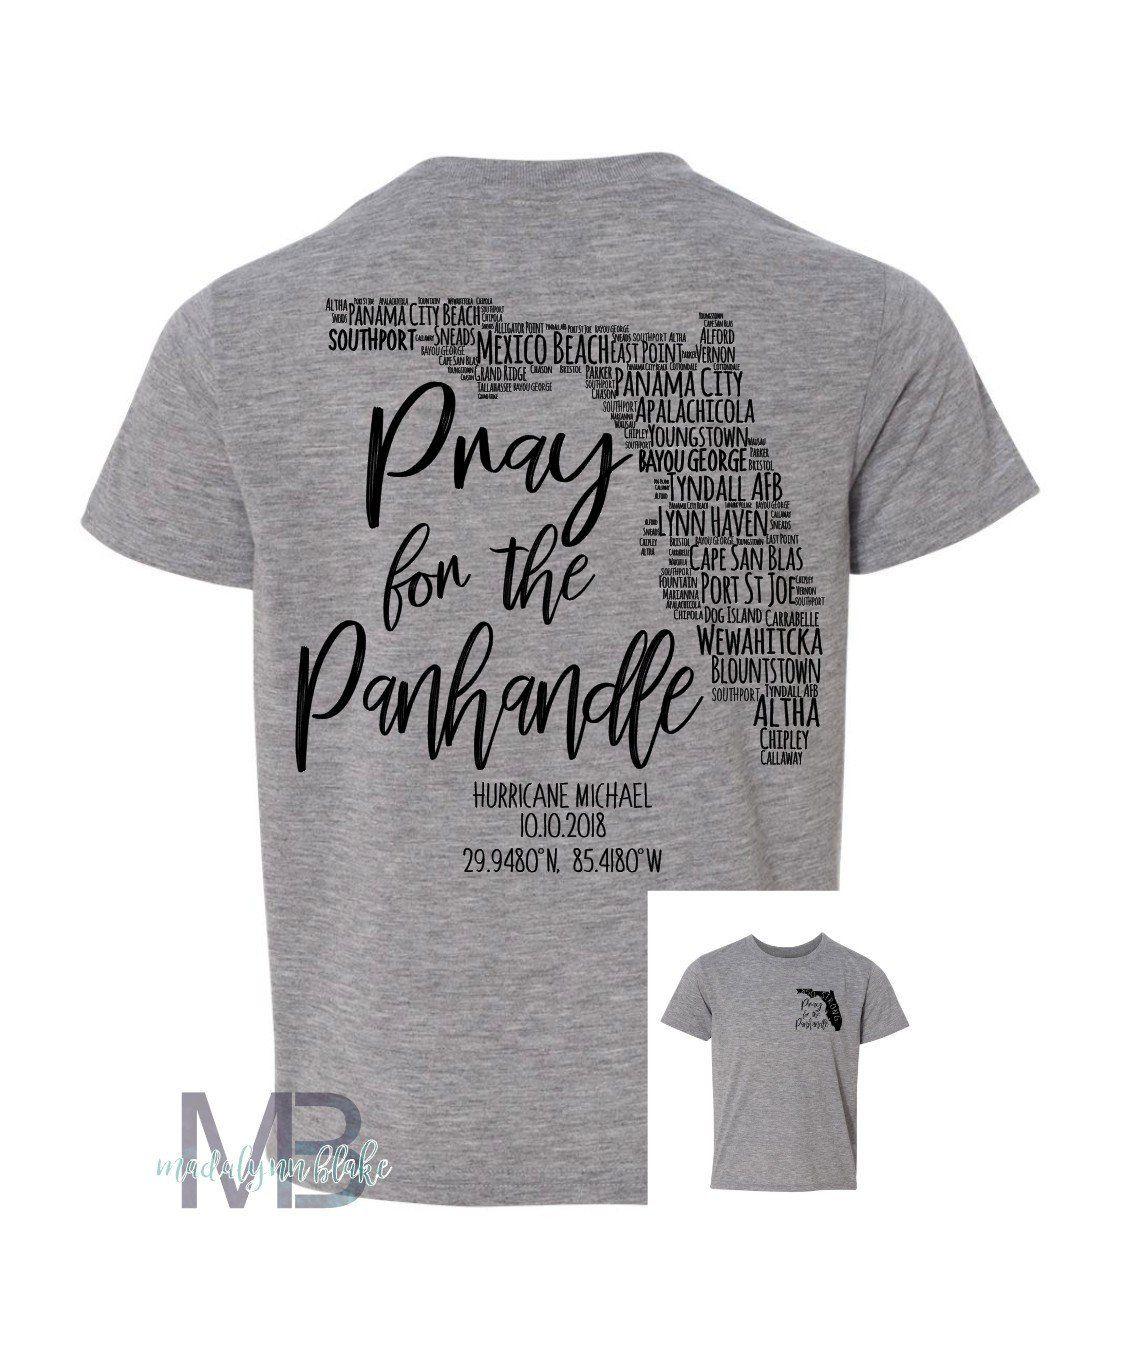 Strong Alligator Logo - Adult Pray For The Panhandle 850 Strong Shirt Now Includes